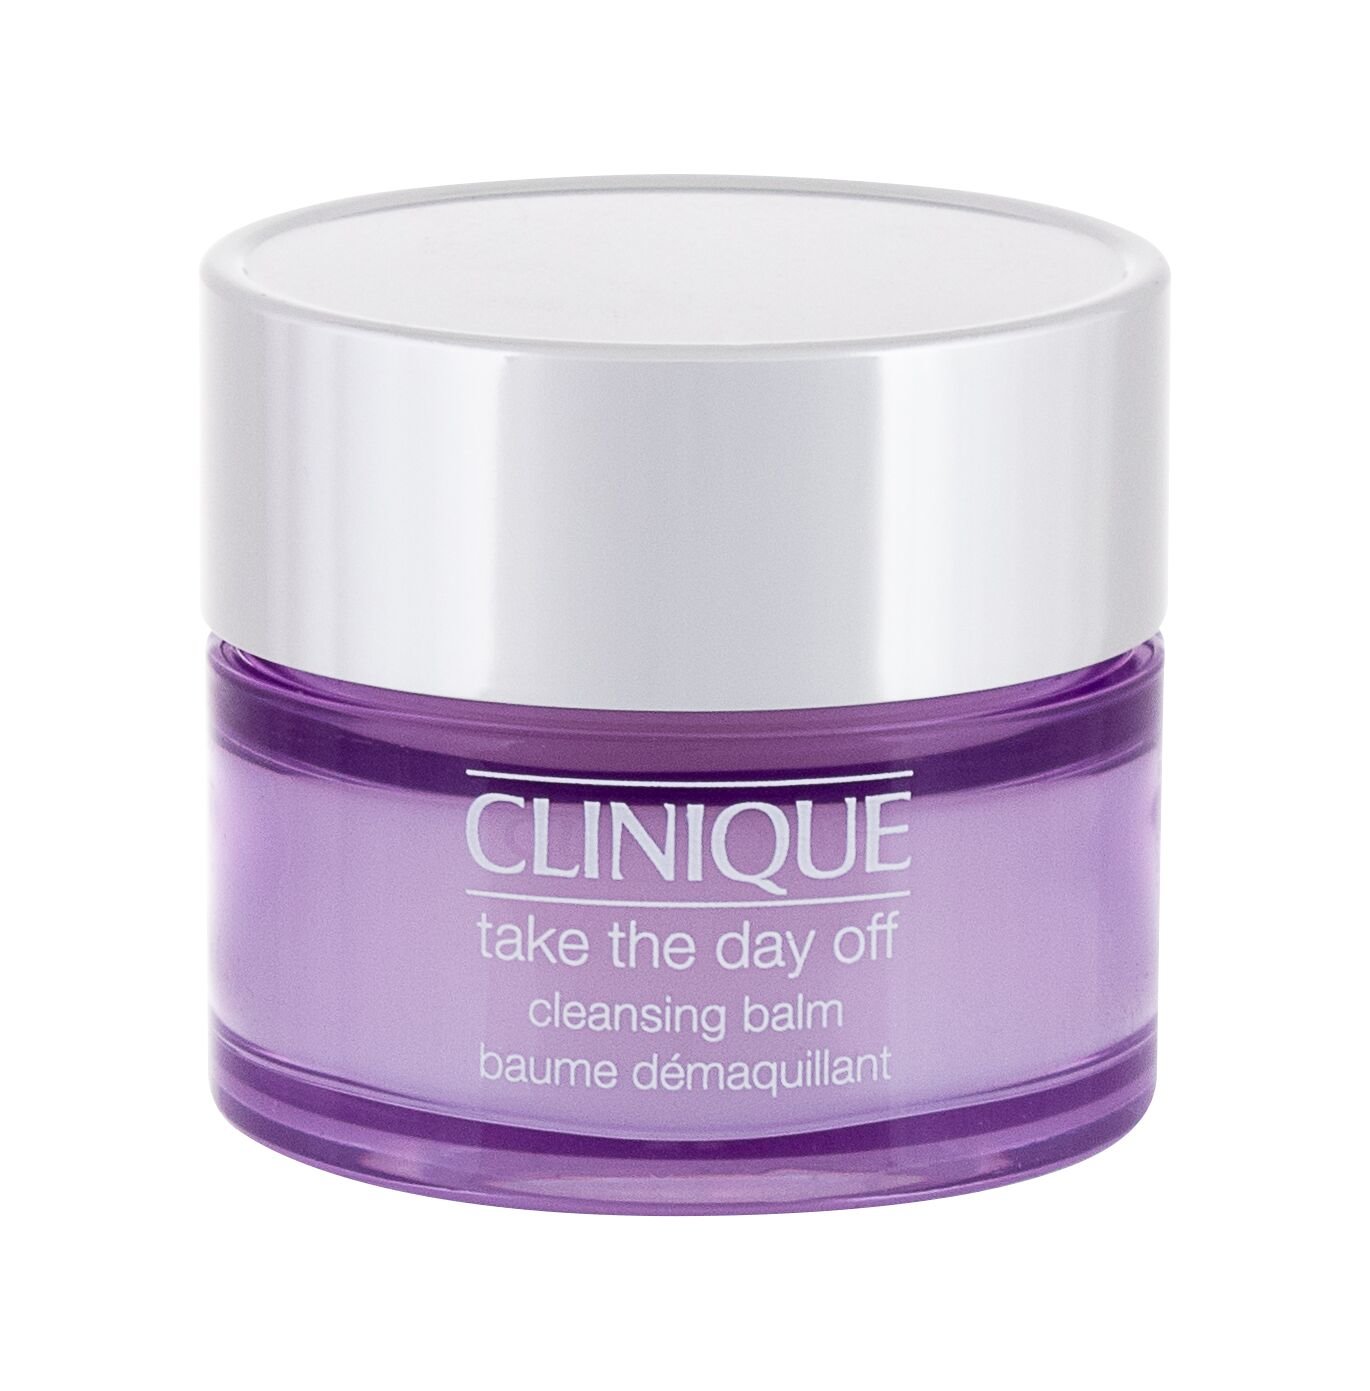 Clinique Take the Day Off Cleansing Balm 30ml veido valiklis